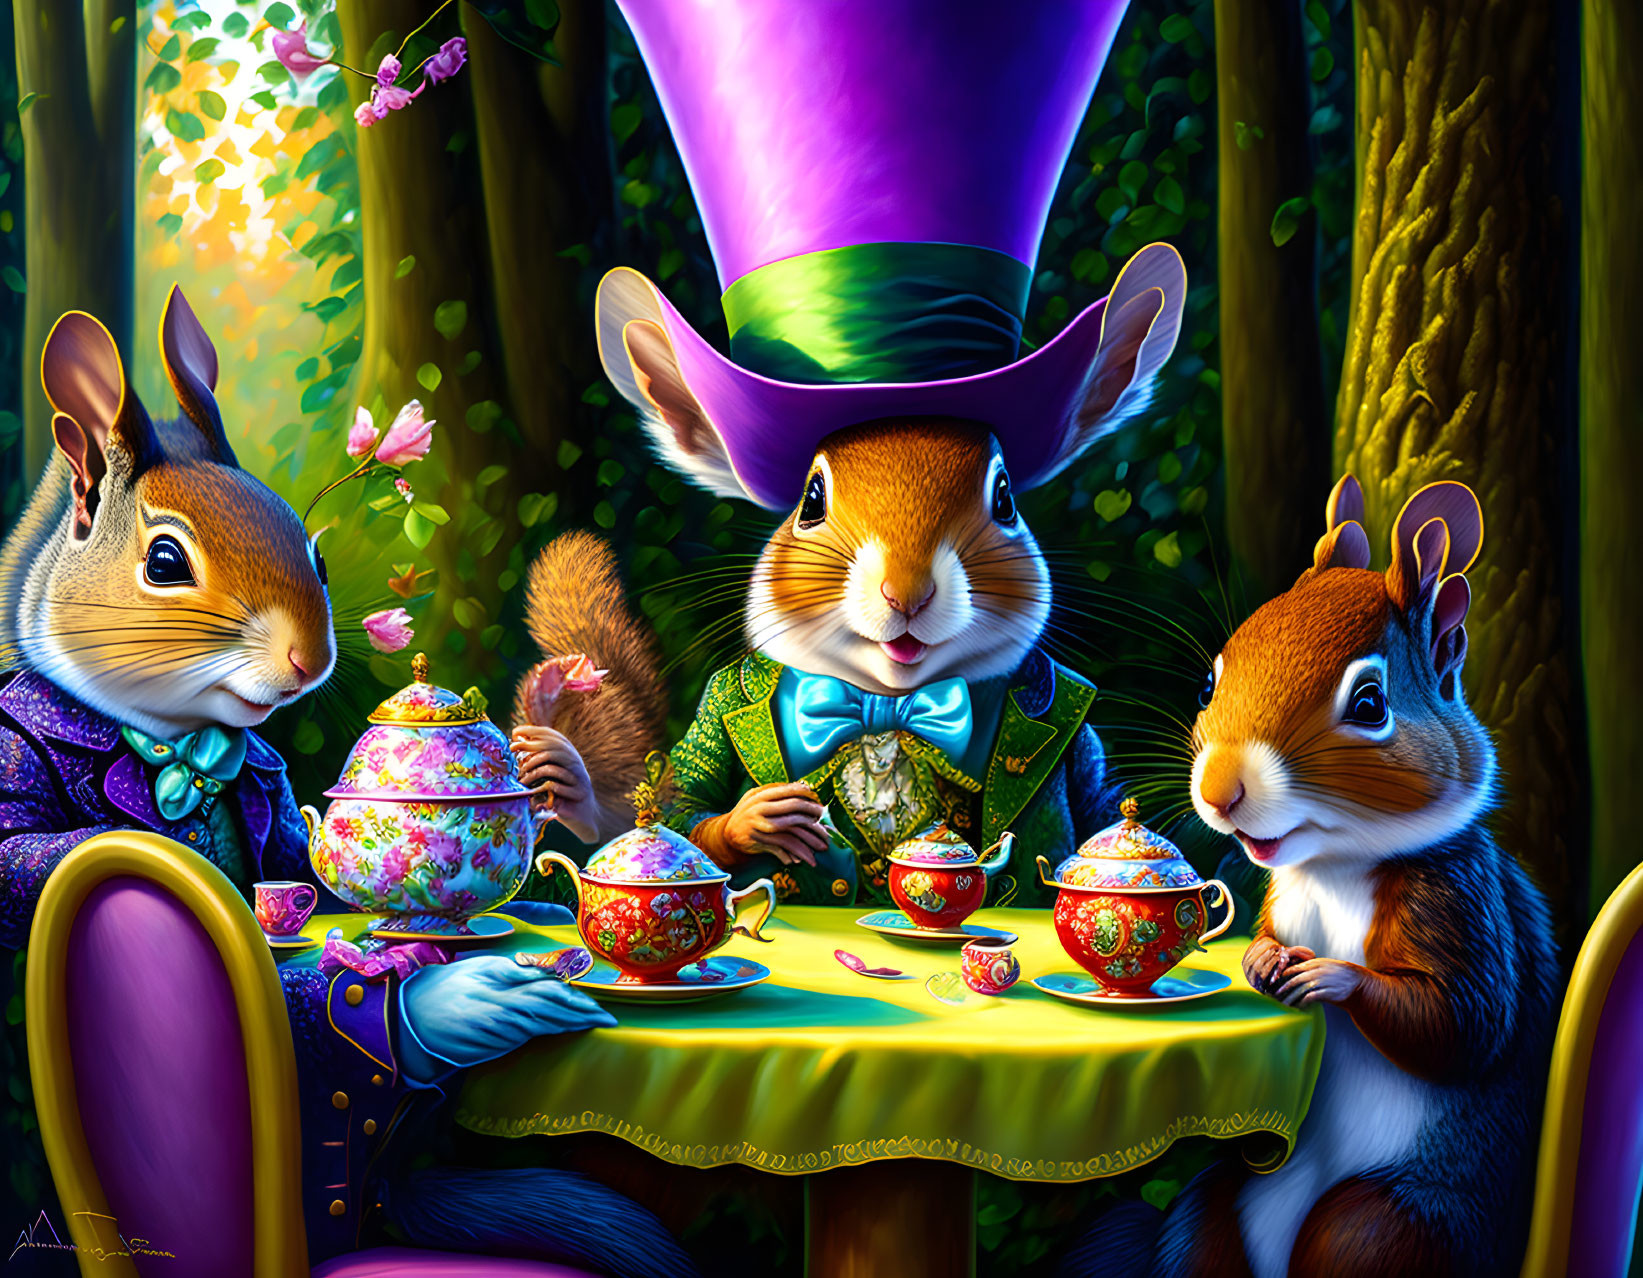 Anthropomorphic squirrels at whimsical forest tea party